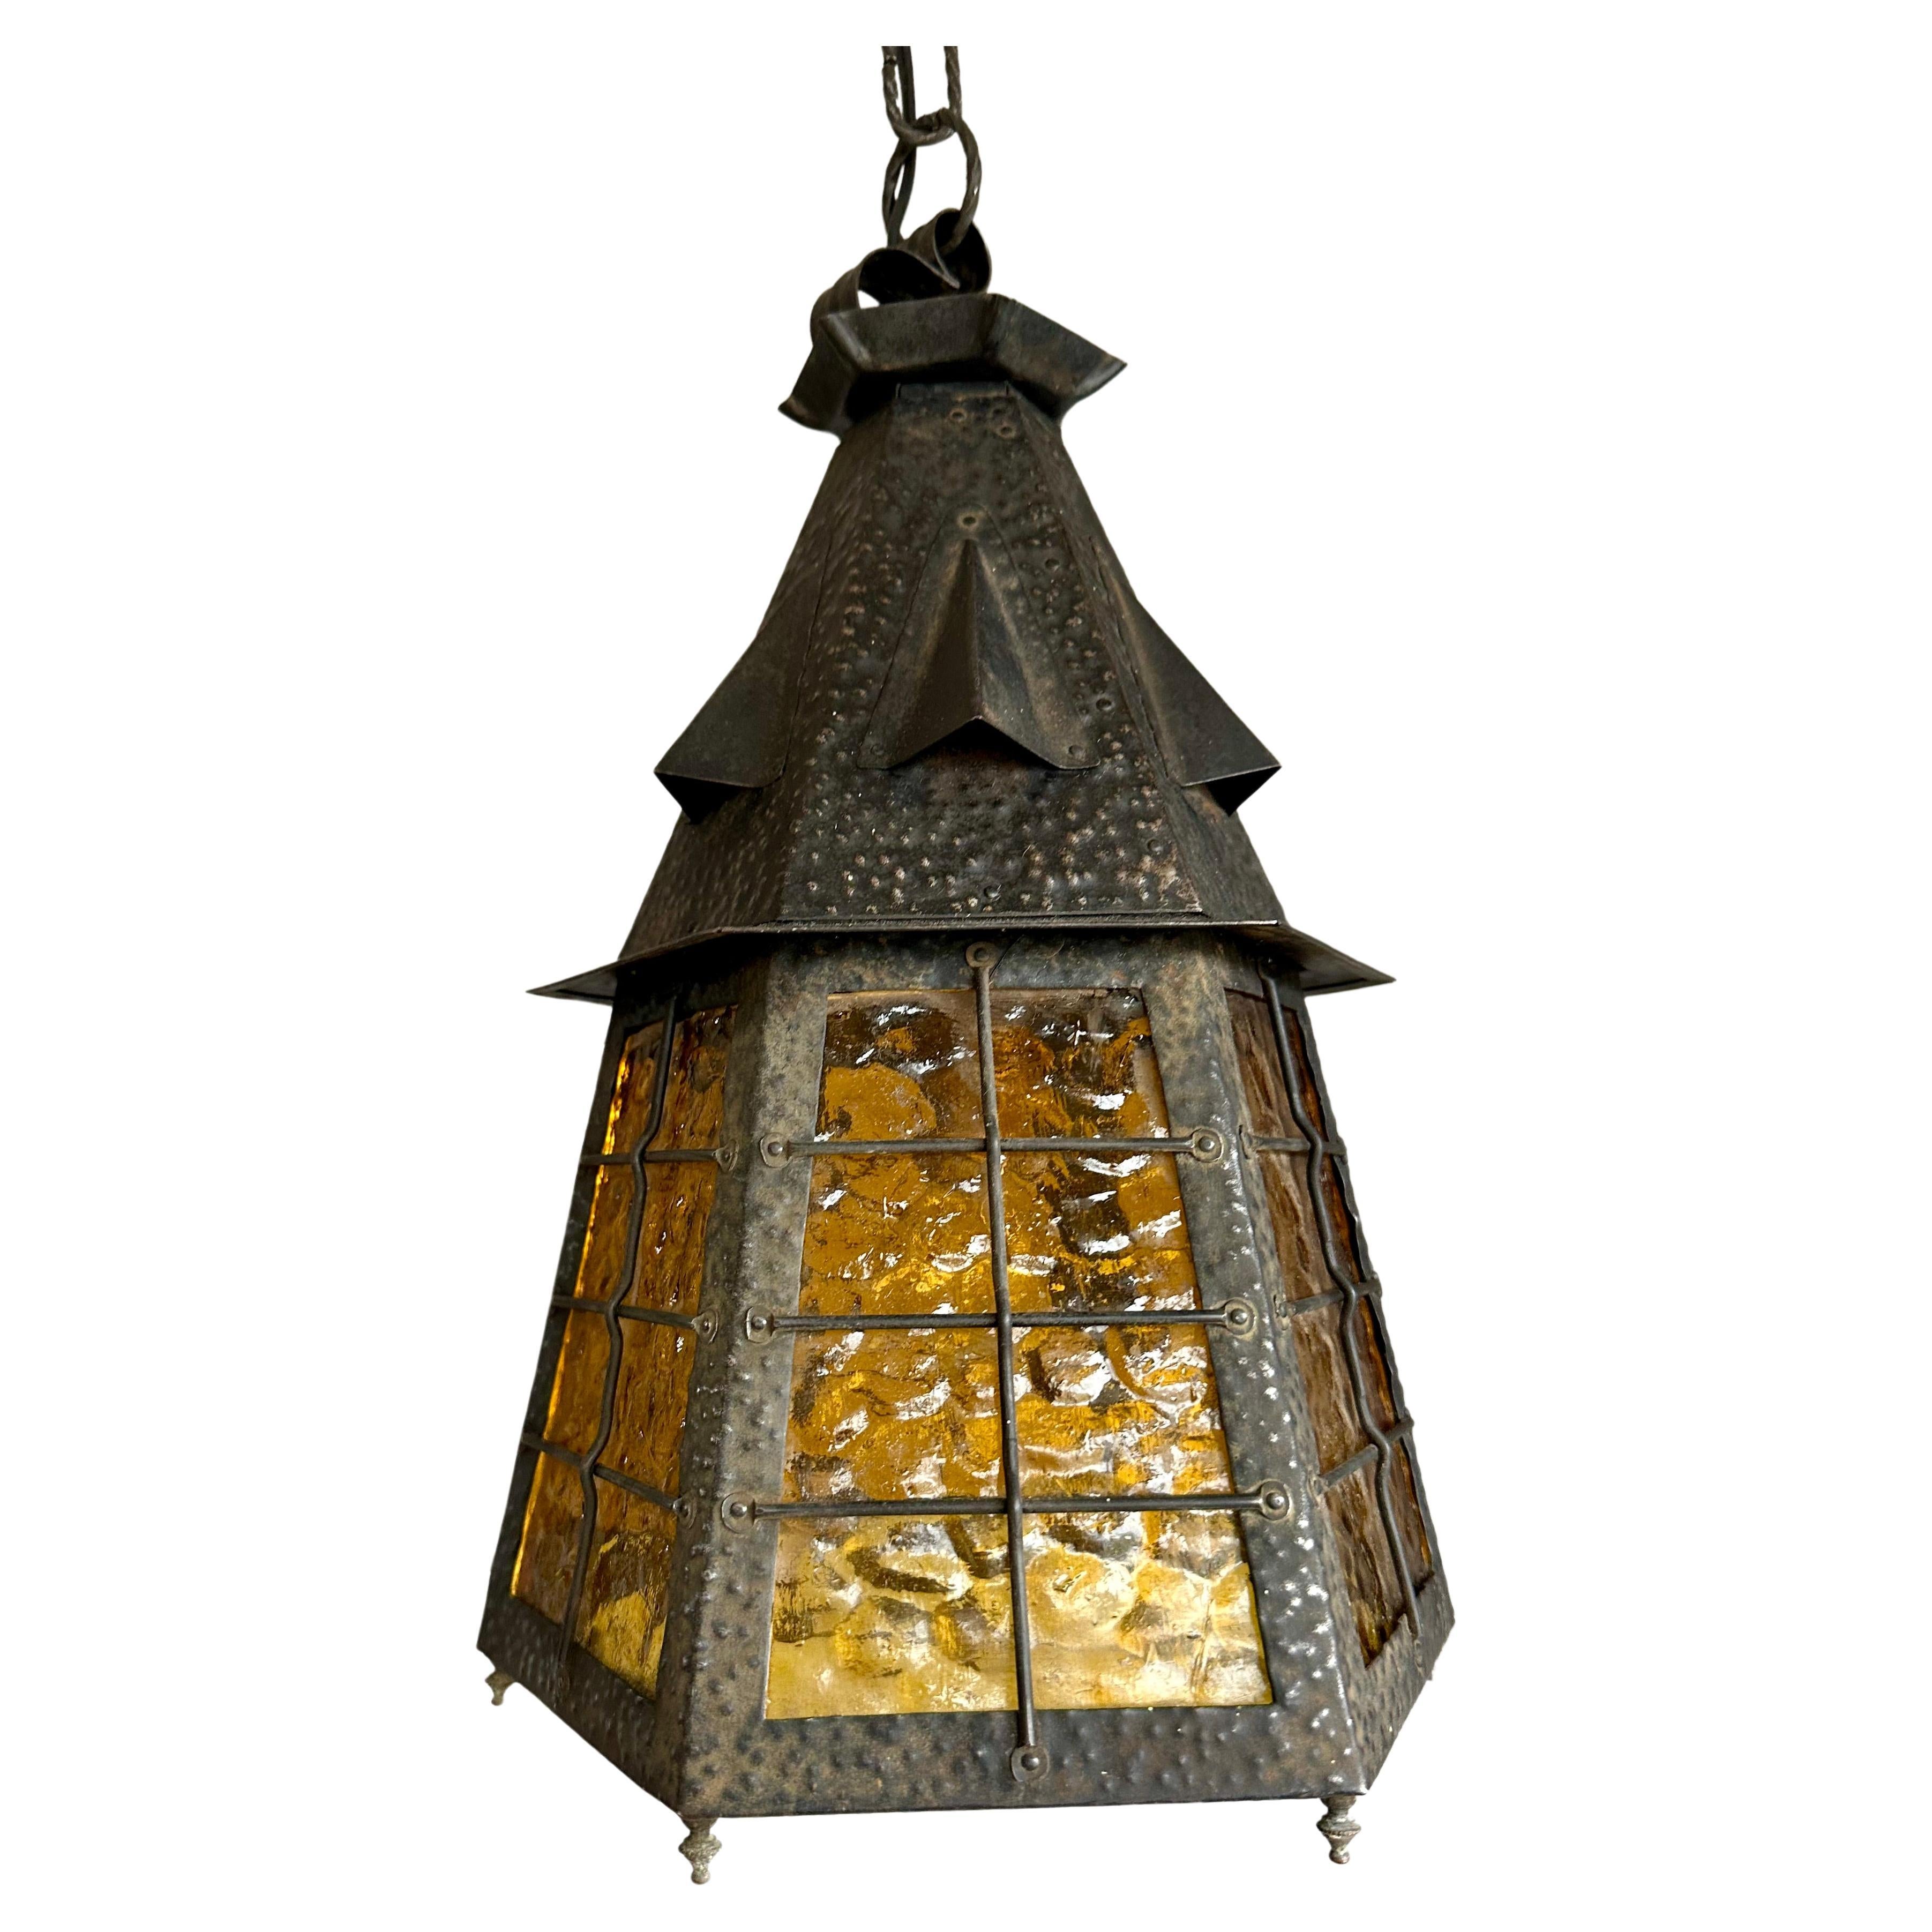 Hammered Arts & Crafts Wrought Iron Pendant Light with Cathedral Glass Lantern Pendant For Sale